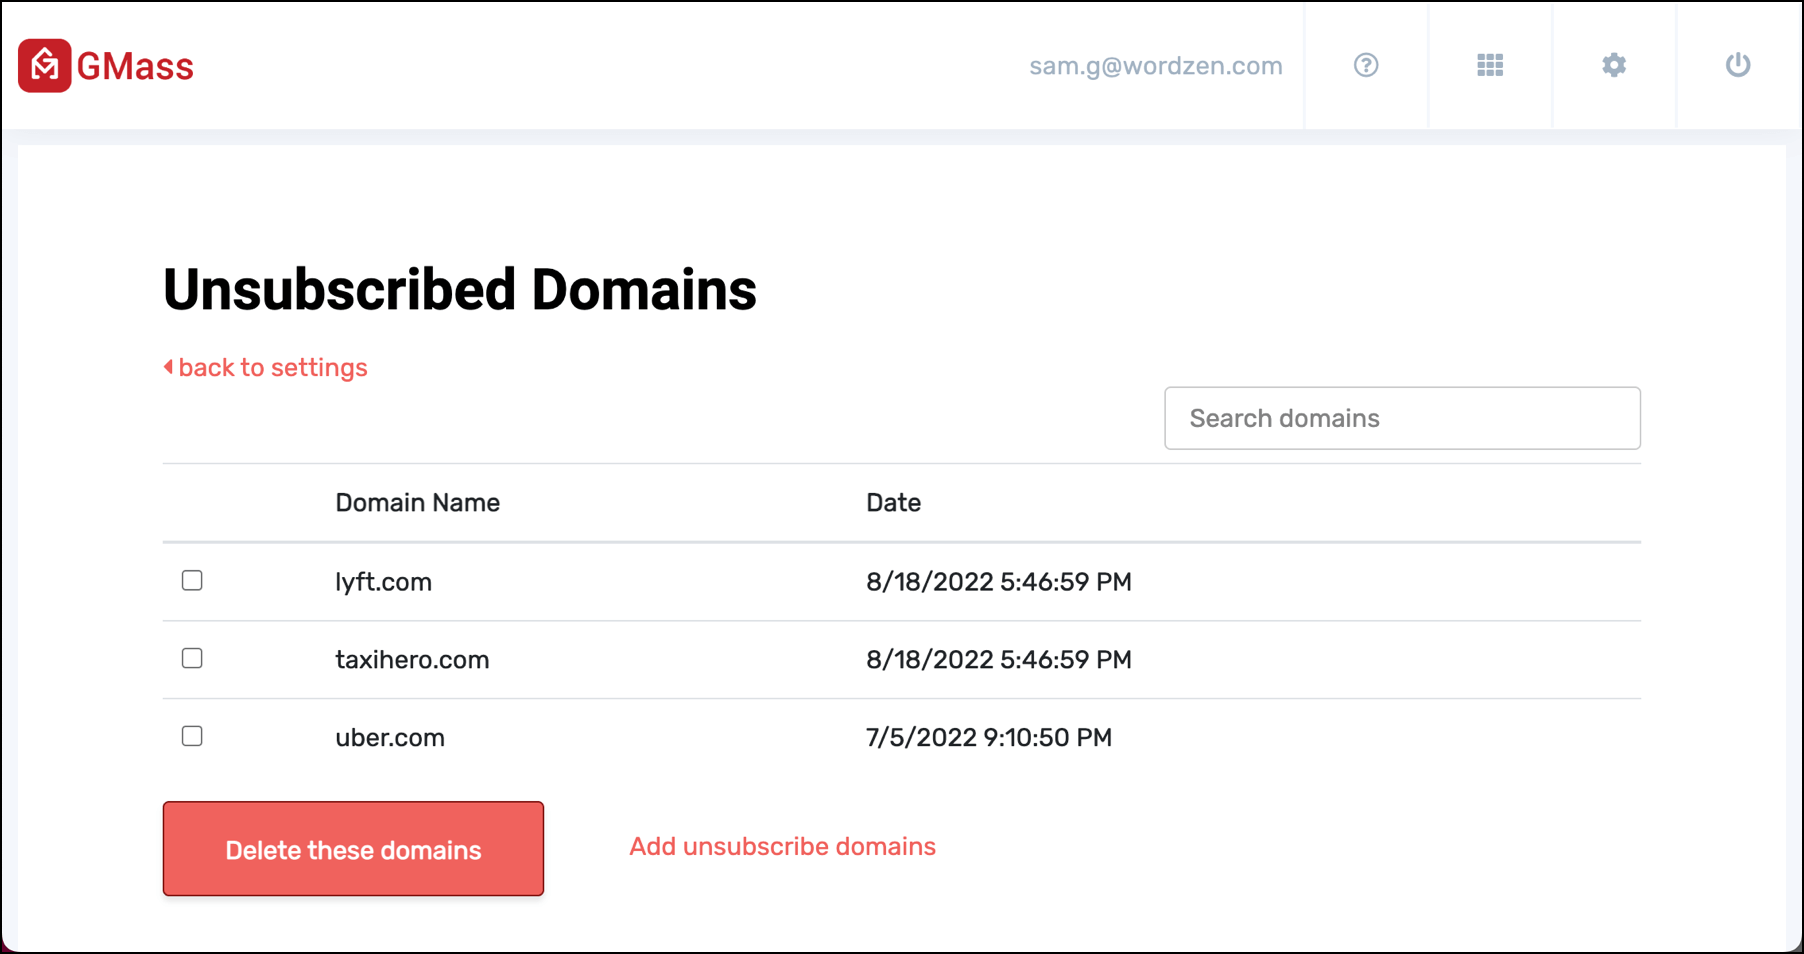 Unsubscribe domain results